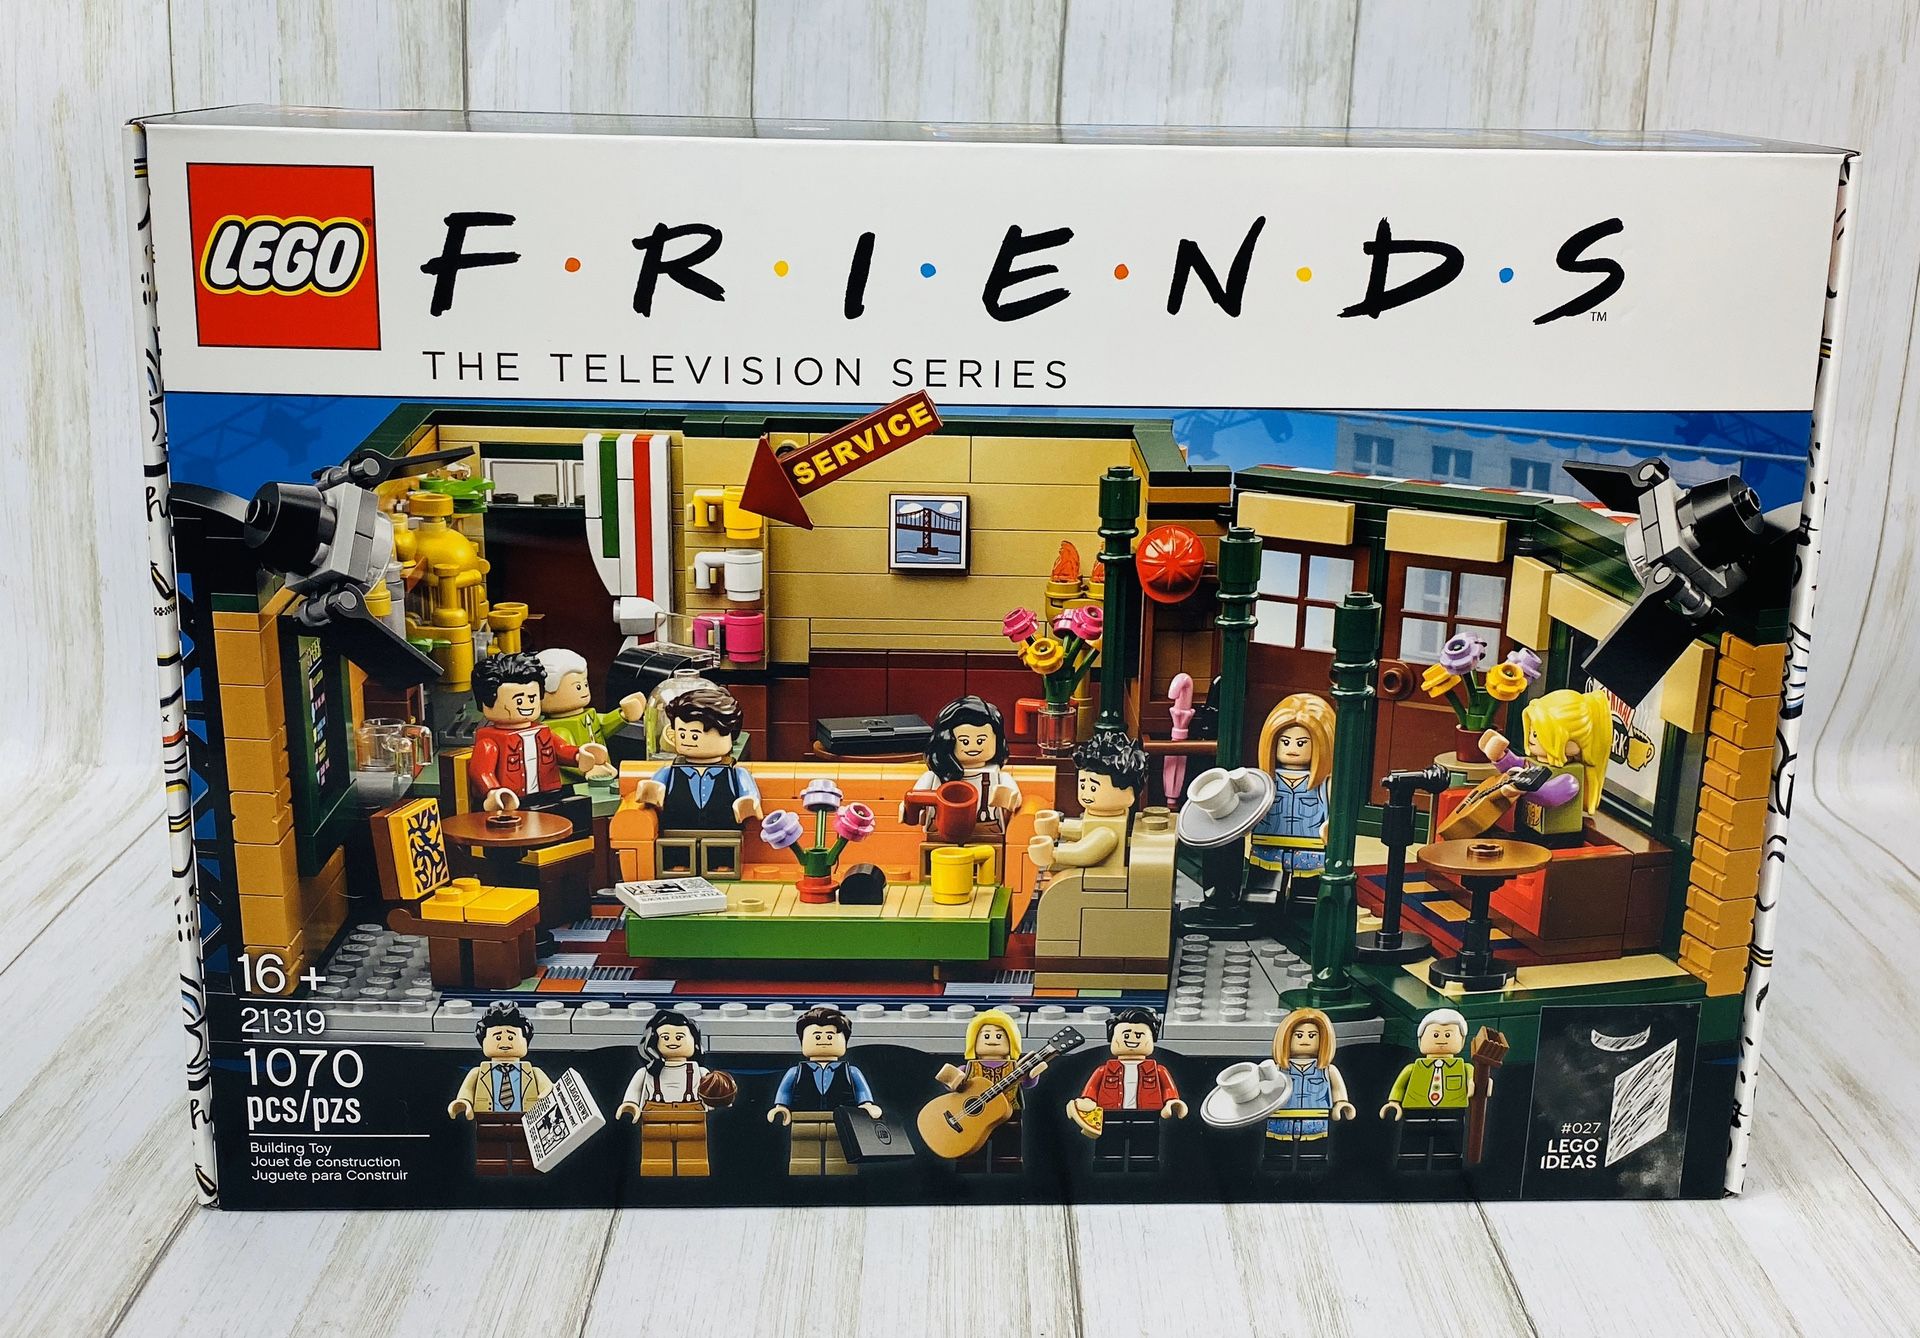 LEGO FRIENDS Central Perk Set Ideas 21319 Brand New In Hand Factory Sealed!